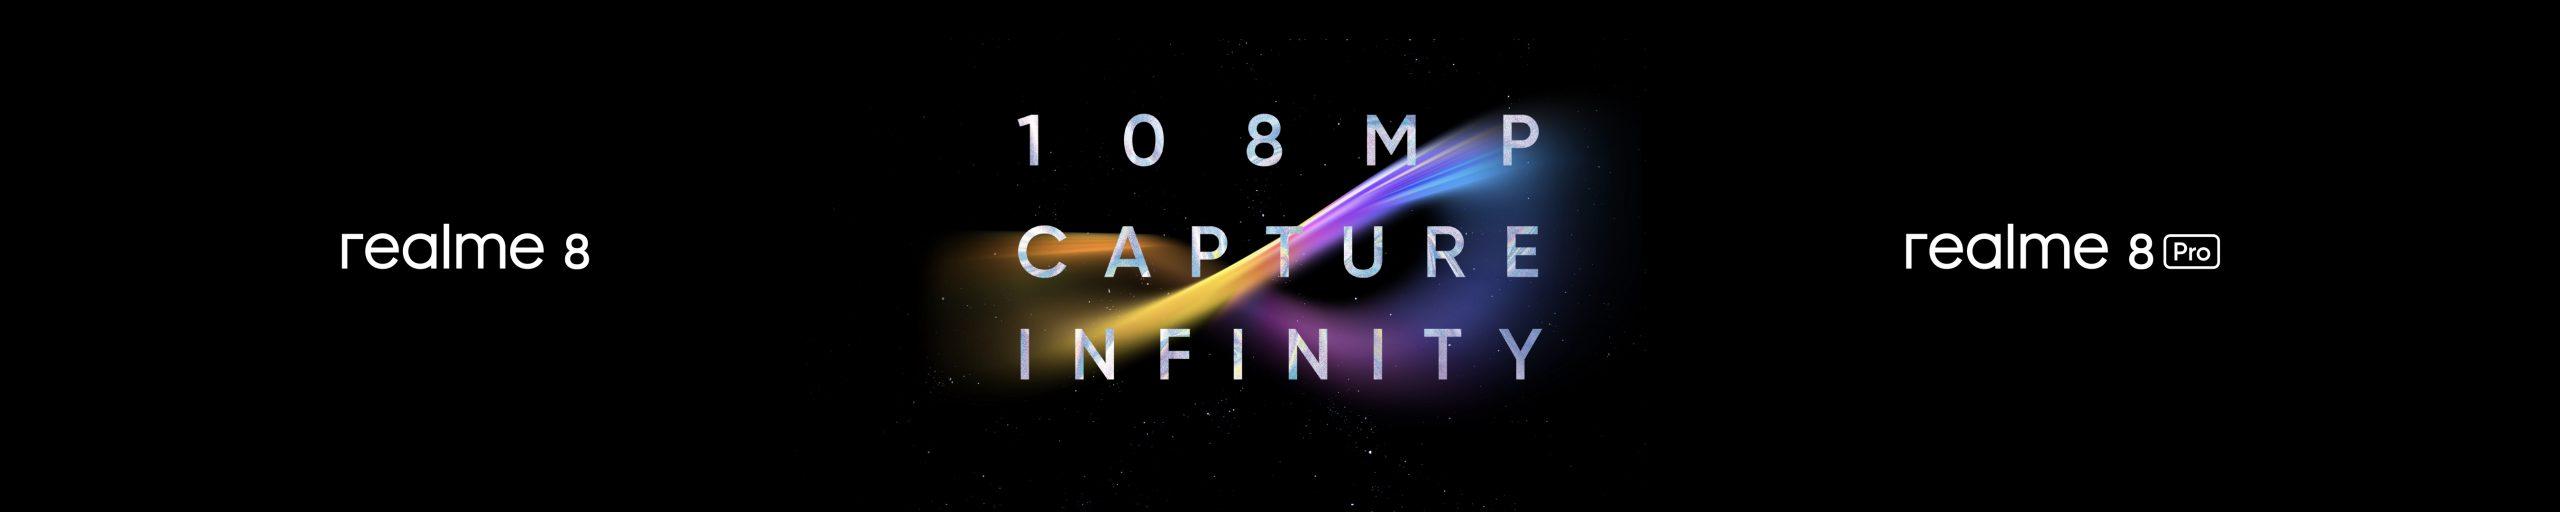 realme Sets its Sights to Capture Infinity with the all new realme 8 Series